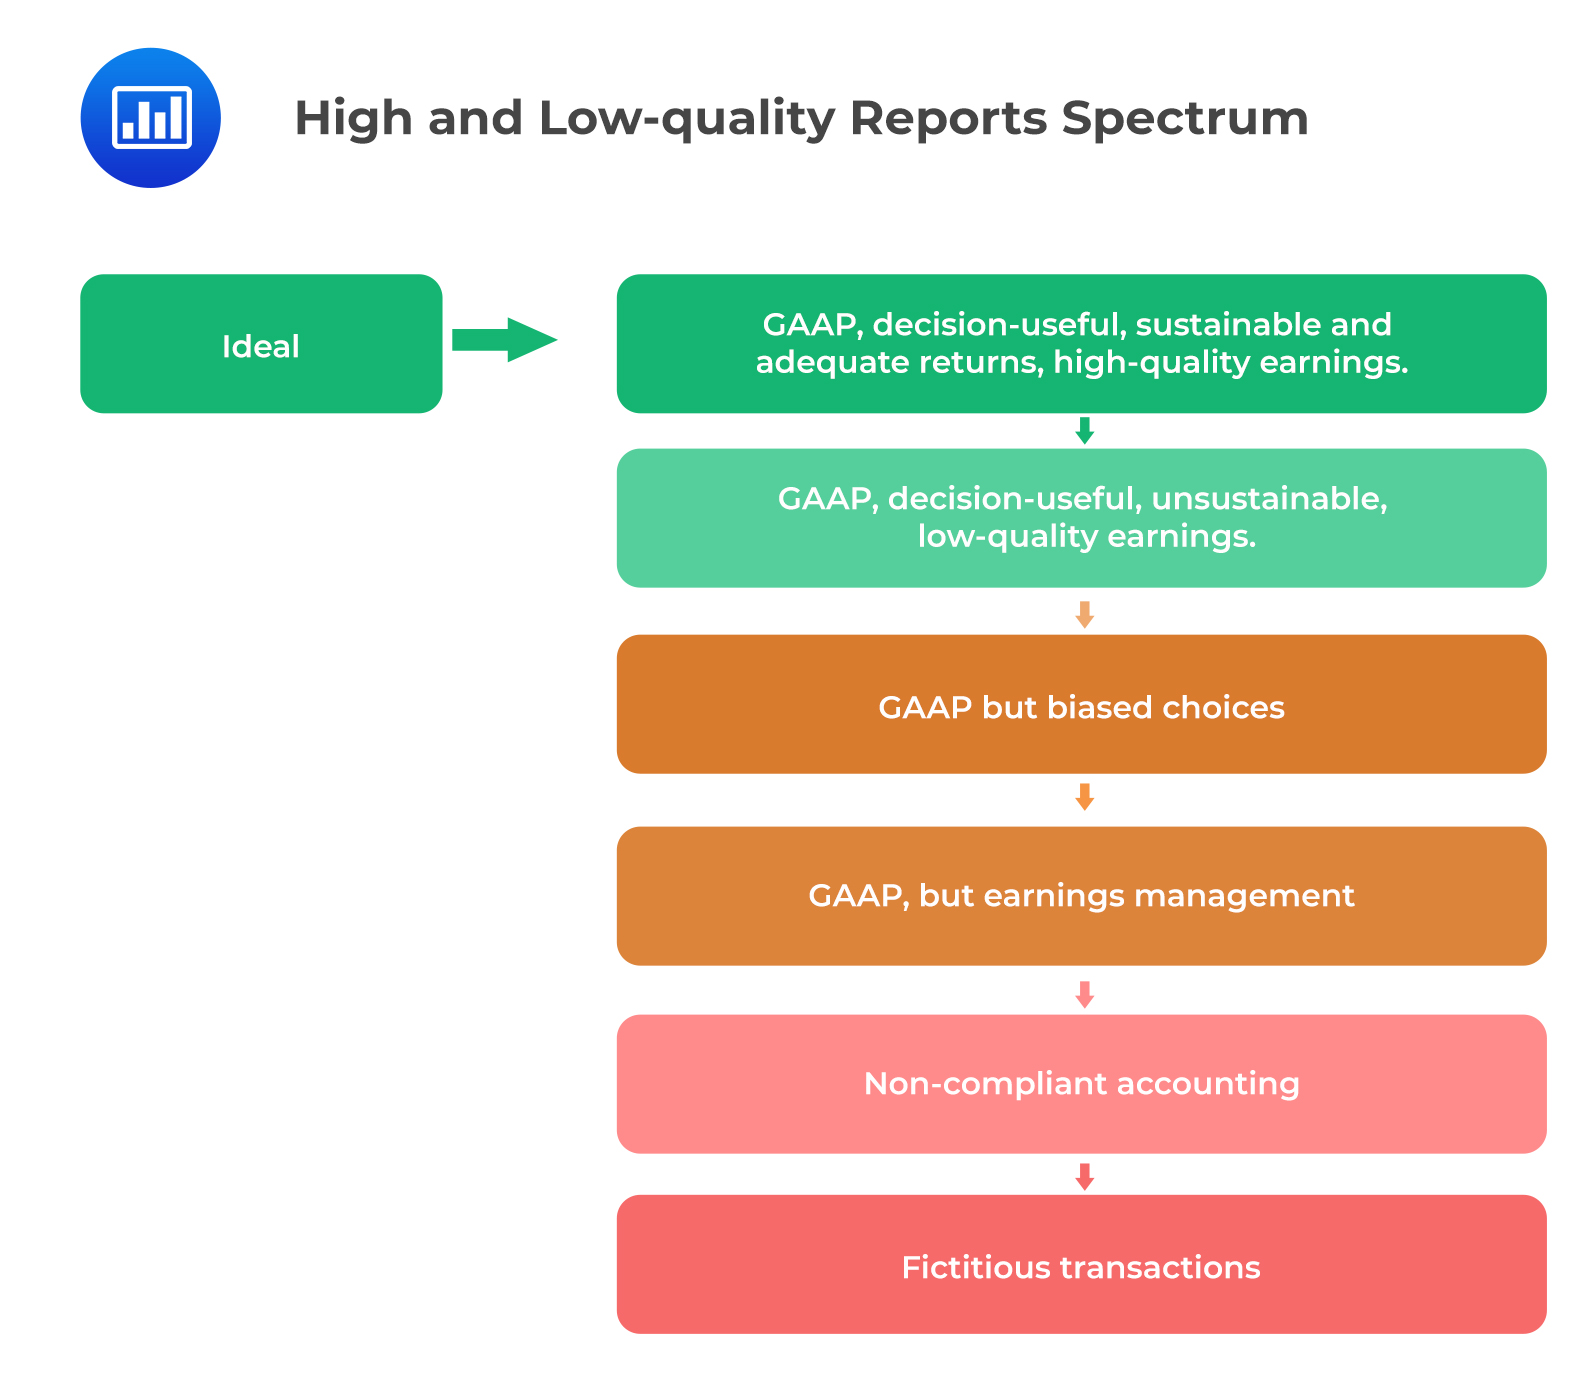 High and Low-quality Reports Spectrum